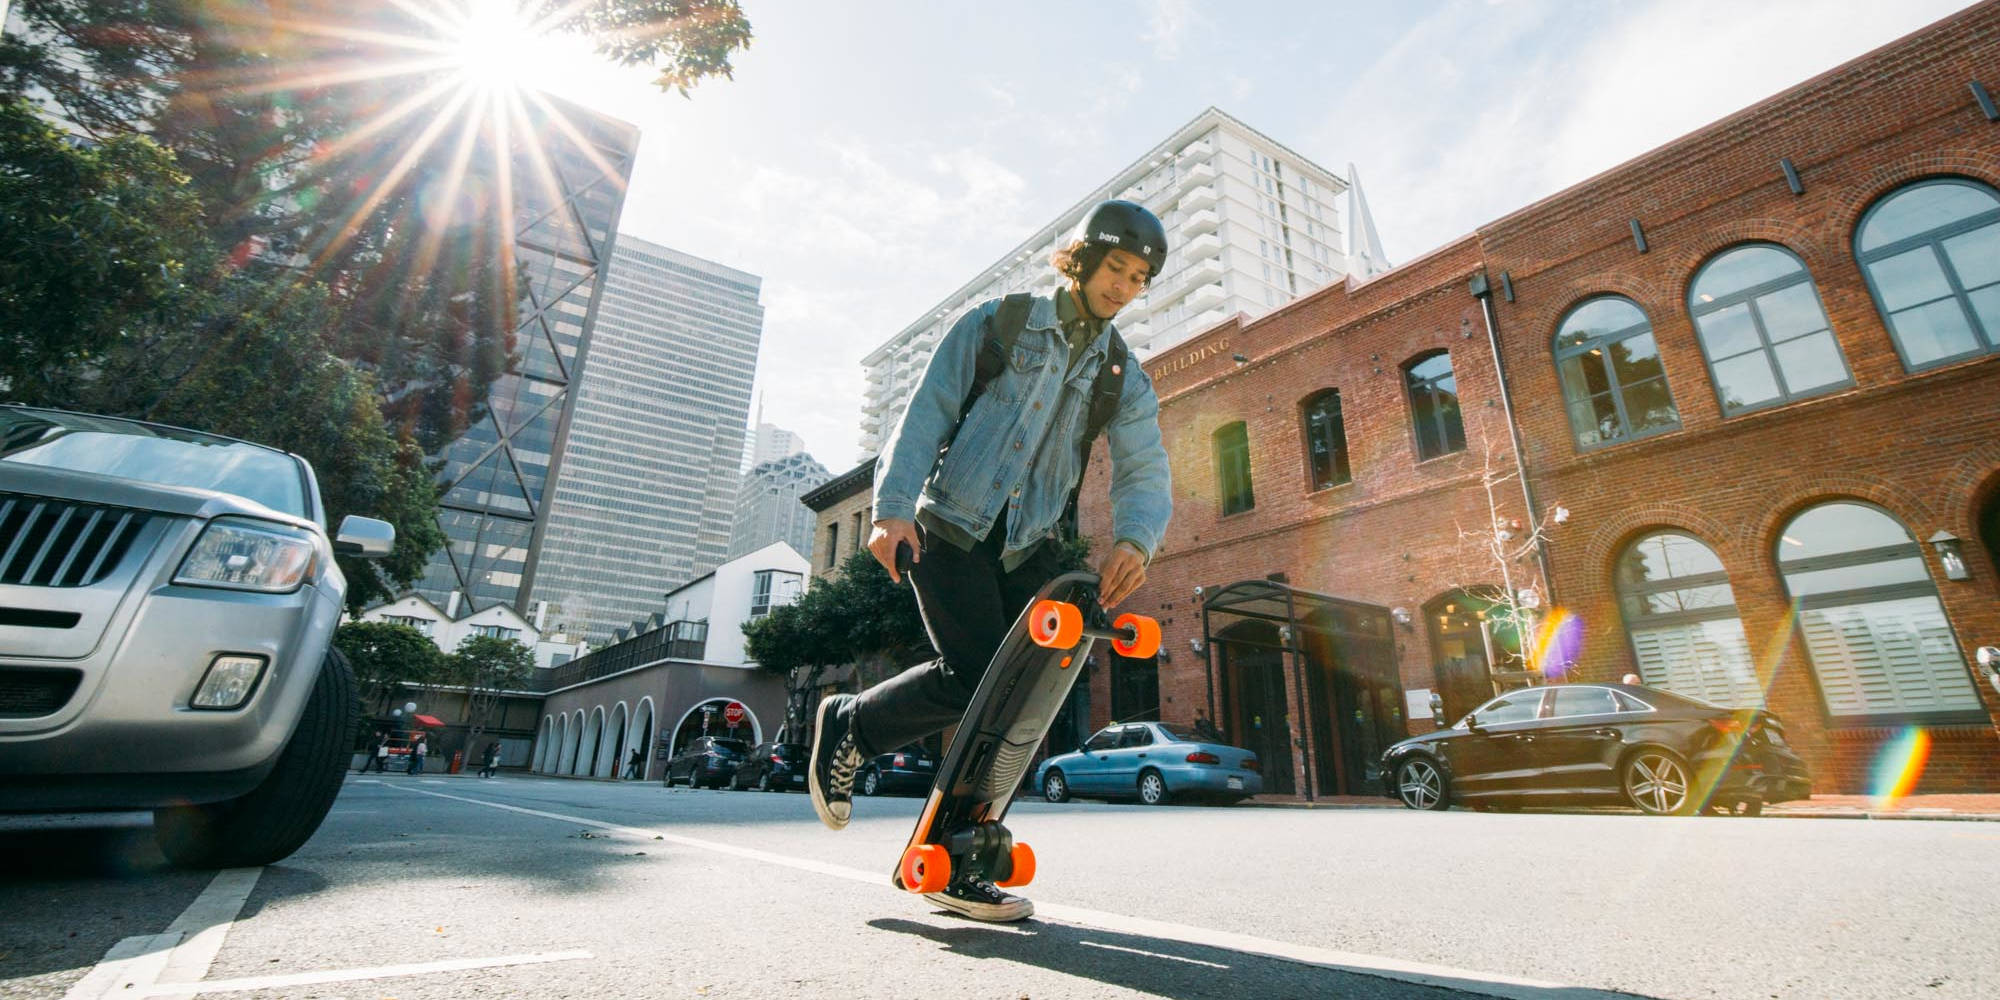 boosted boards